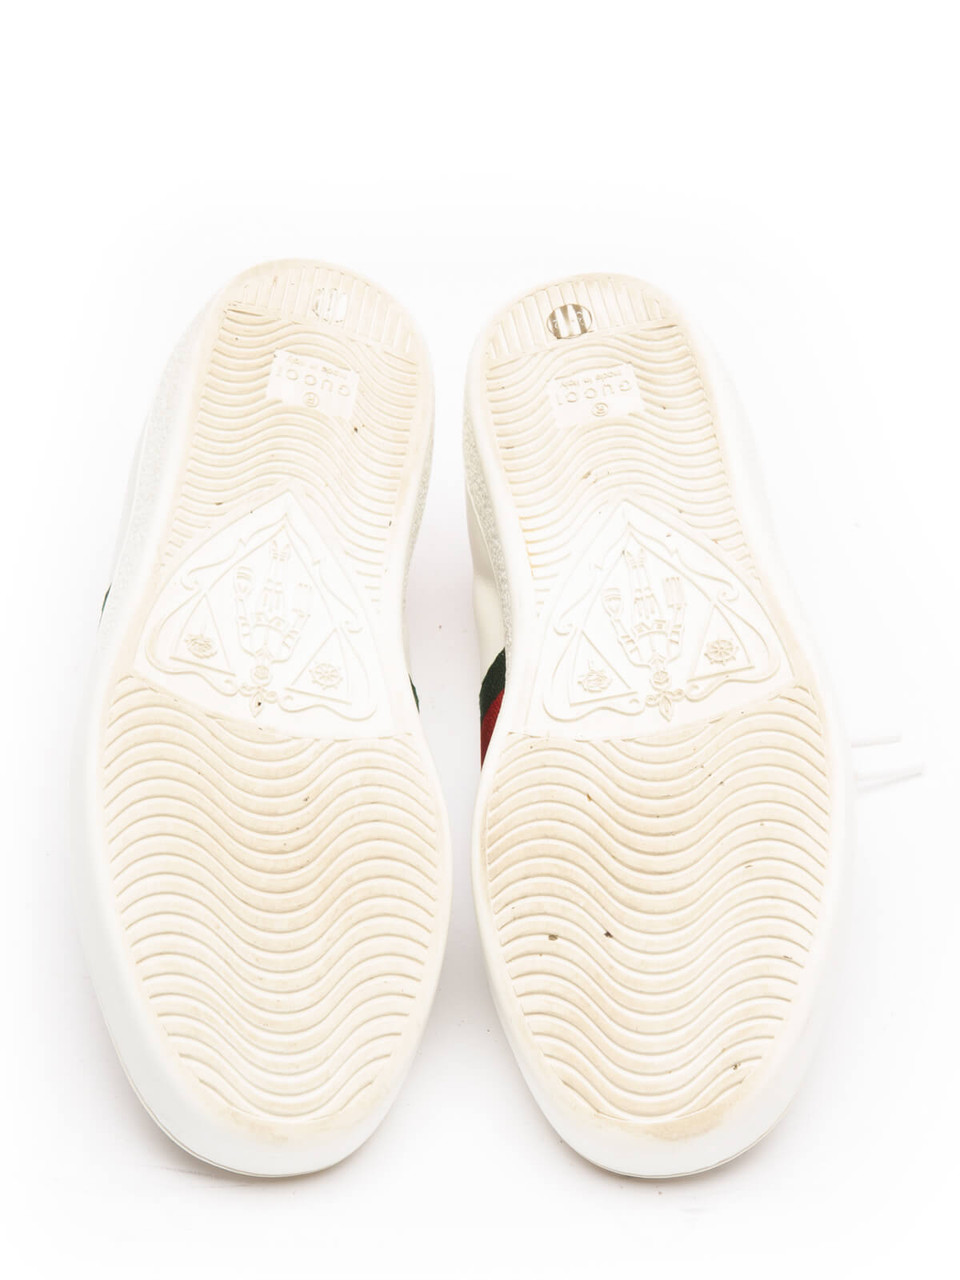 Gucci Women's New Ace Safety Pin Sneakers, Size 4.5 UK, White Python Leather